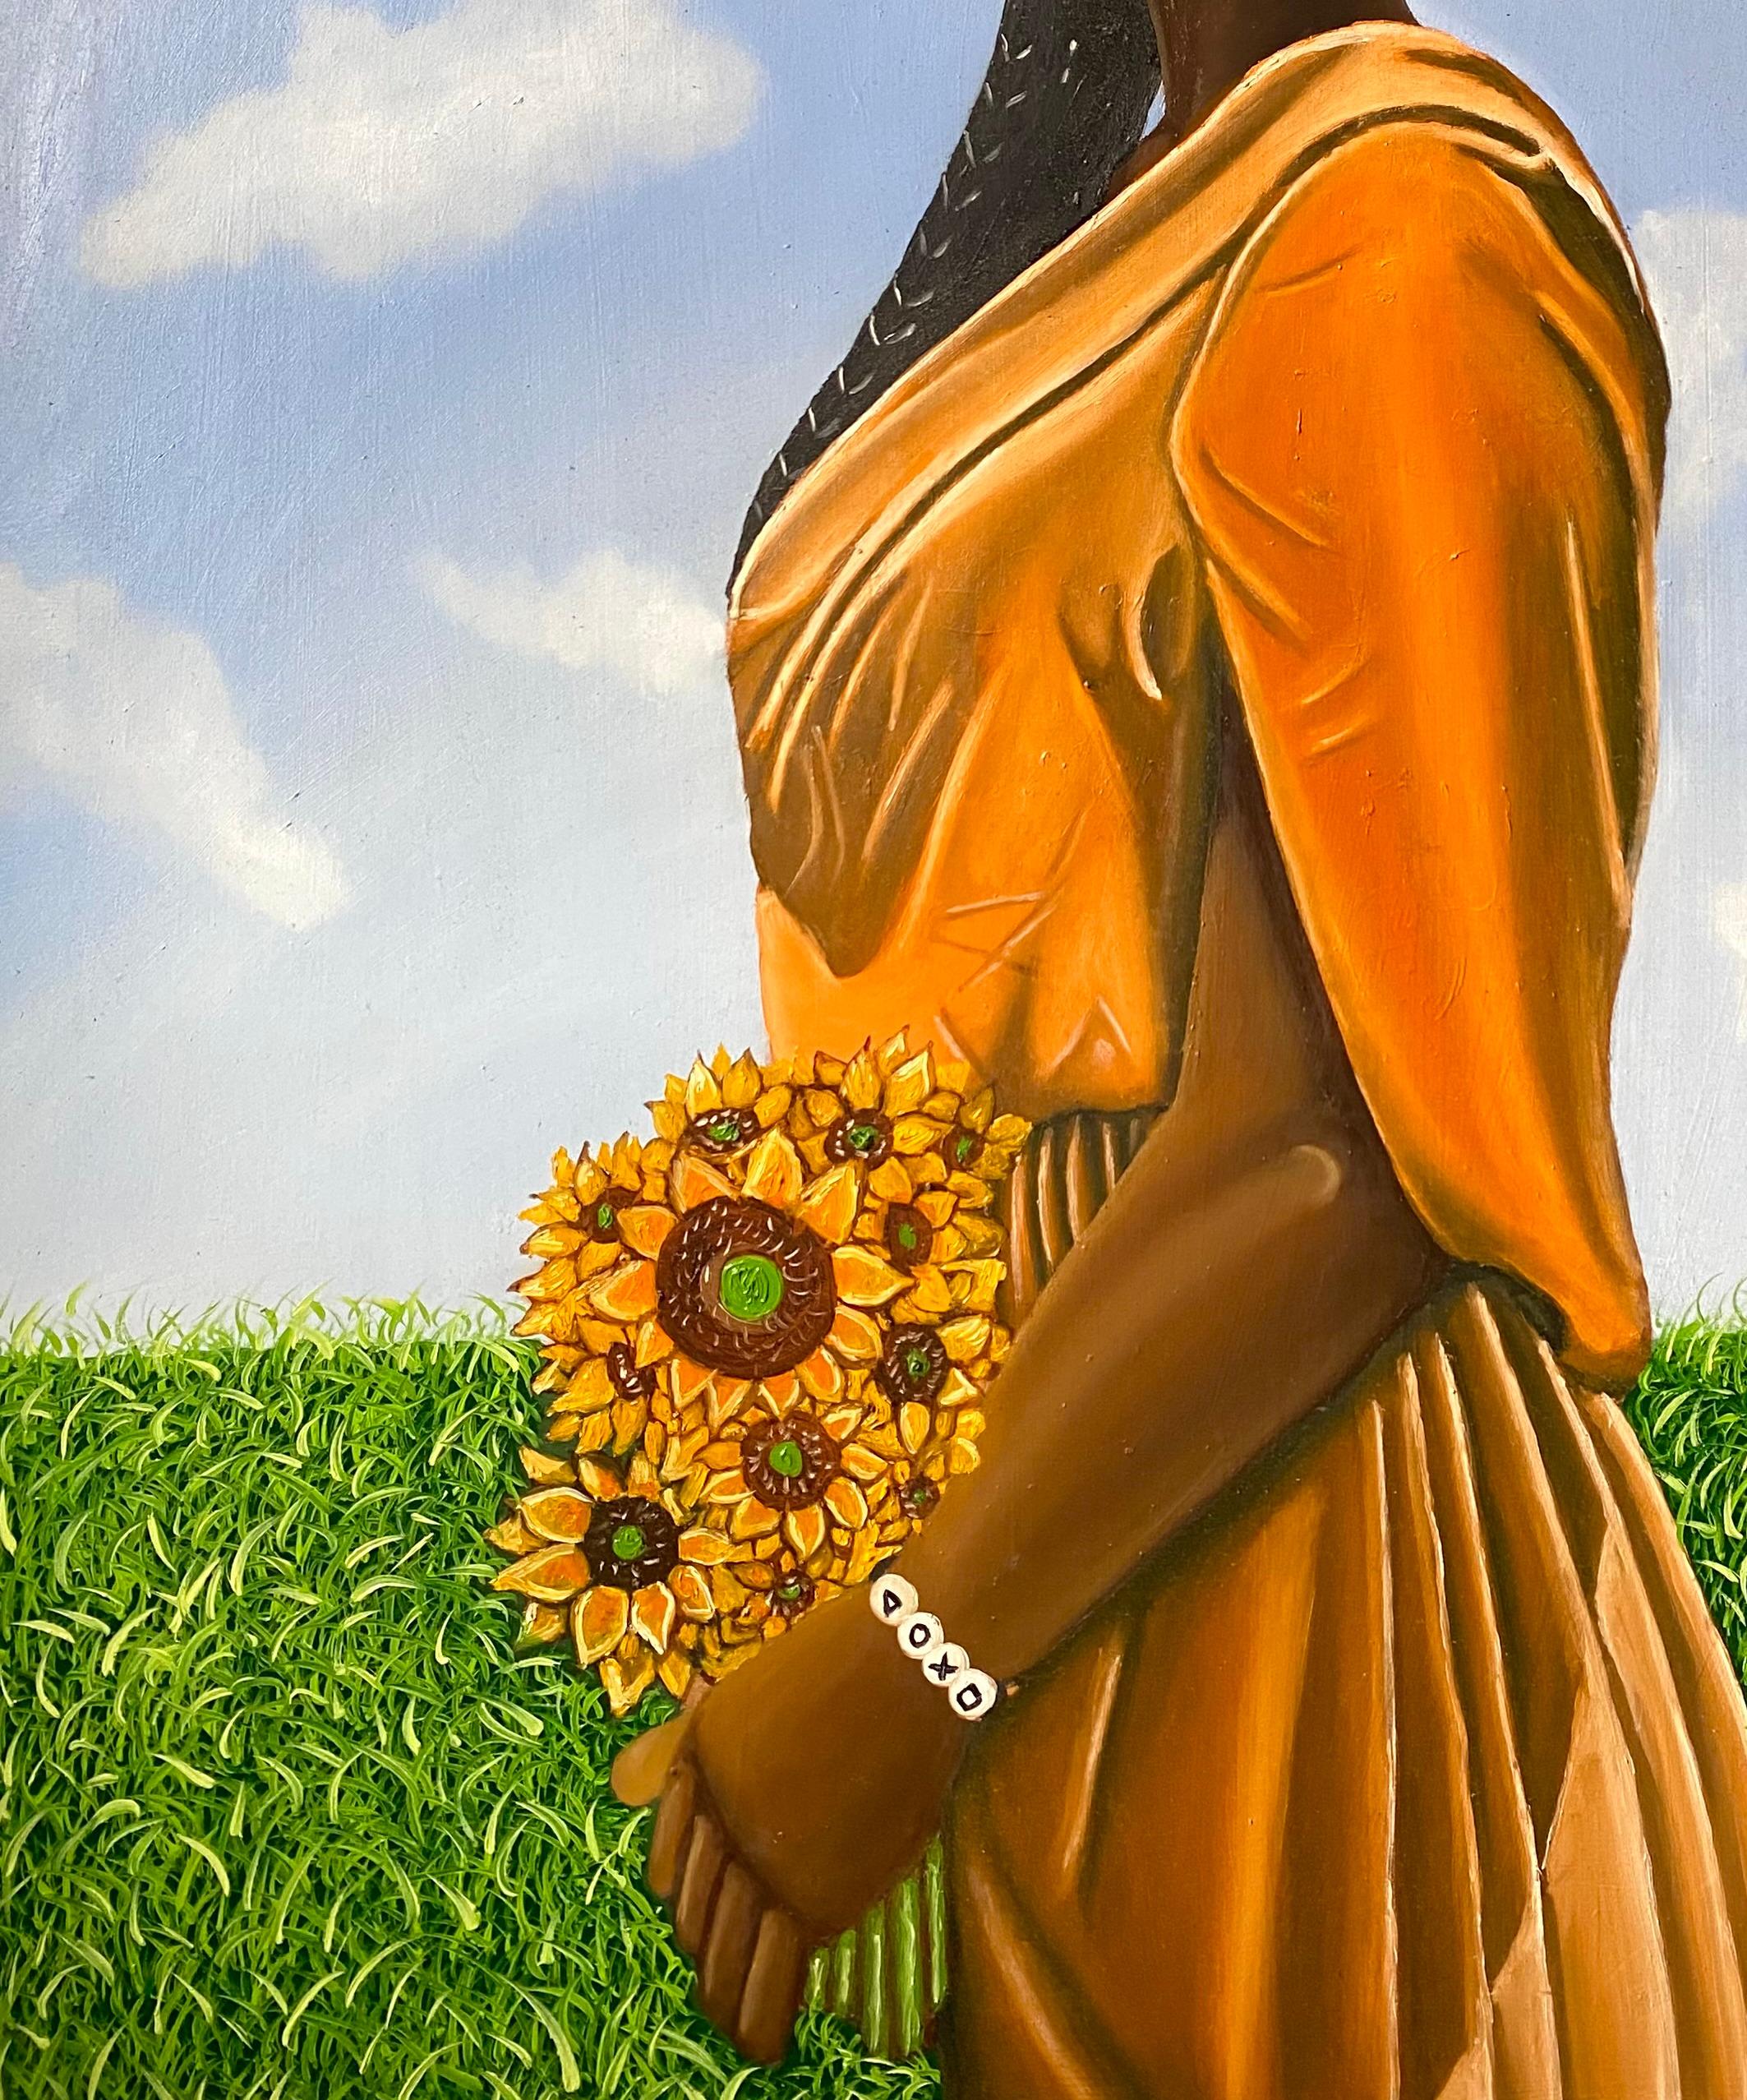 I Come Bearing Gifts 2 - Painting by Tolulope Adigbo